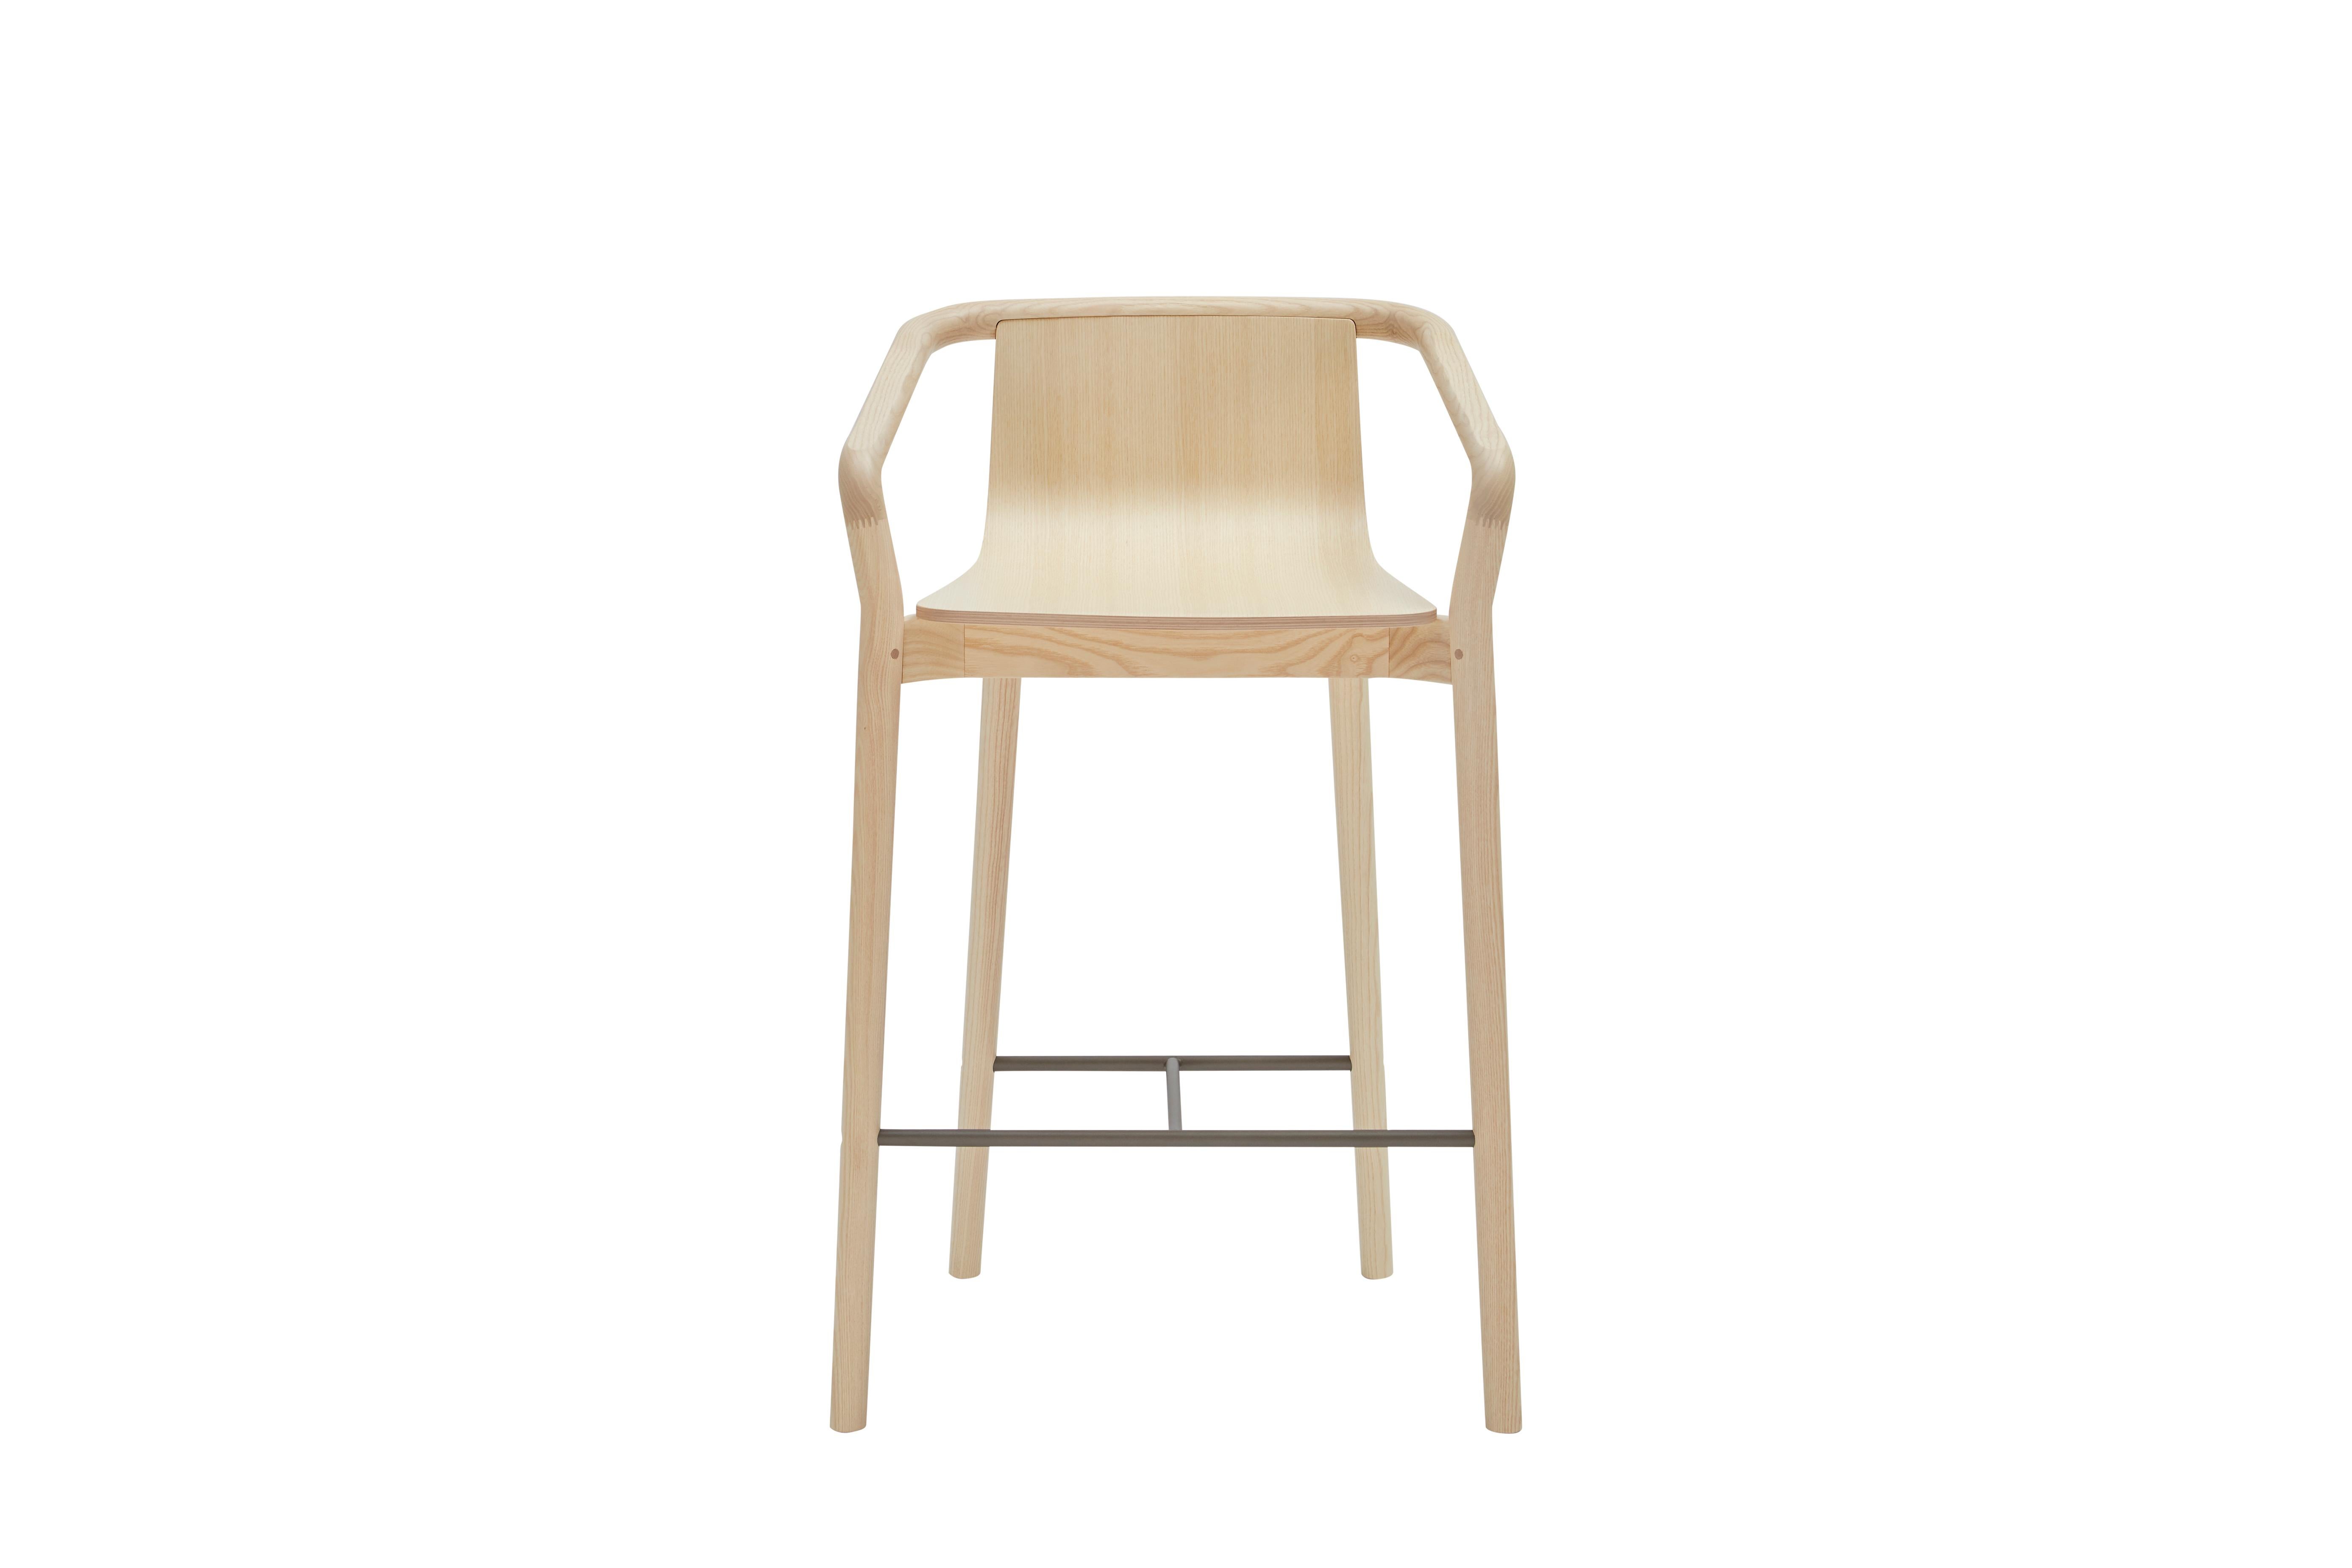 The Thomas barstool completes the Thomas Family and is derived from the same design elements that define the series. Featuring a formed plywood shell suspended in a solid ash frame with the distinctive carved armrest detail, the stool features a